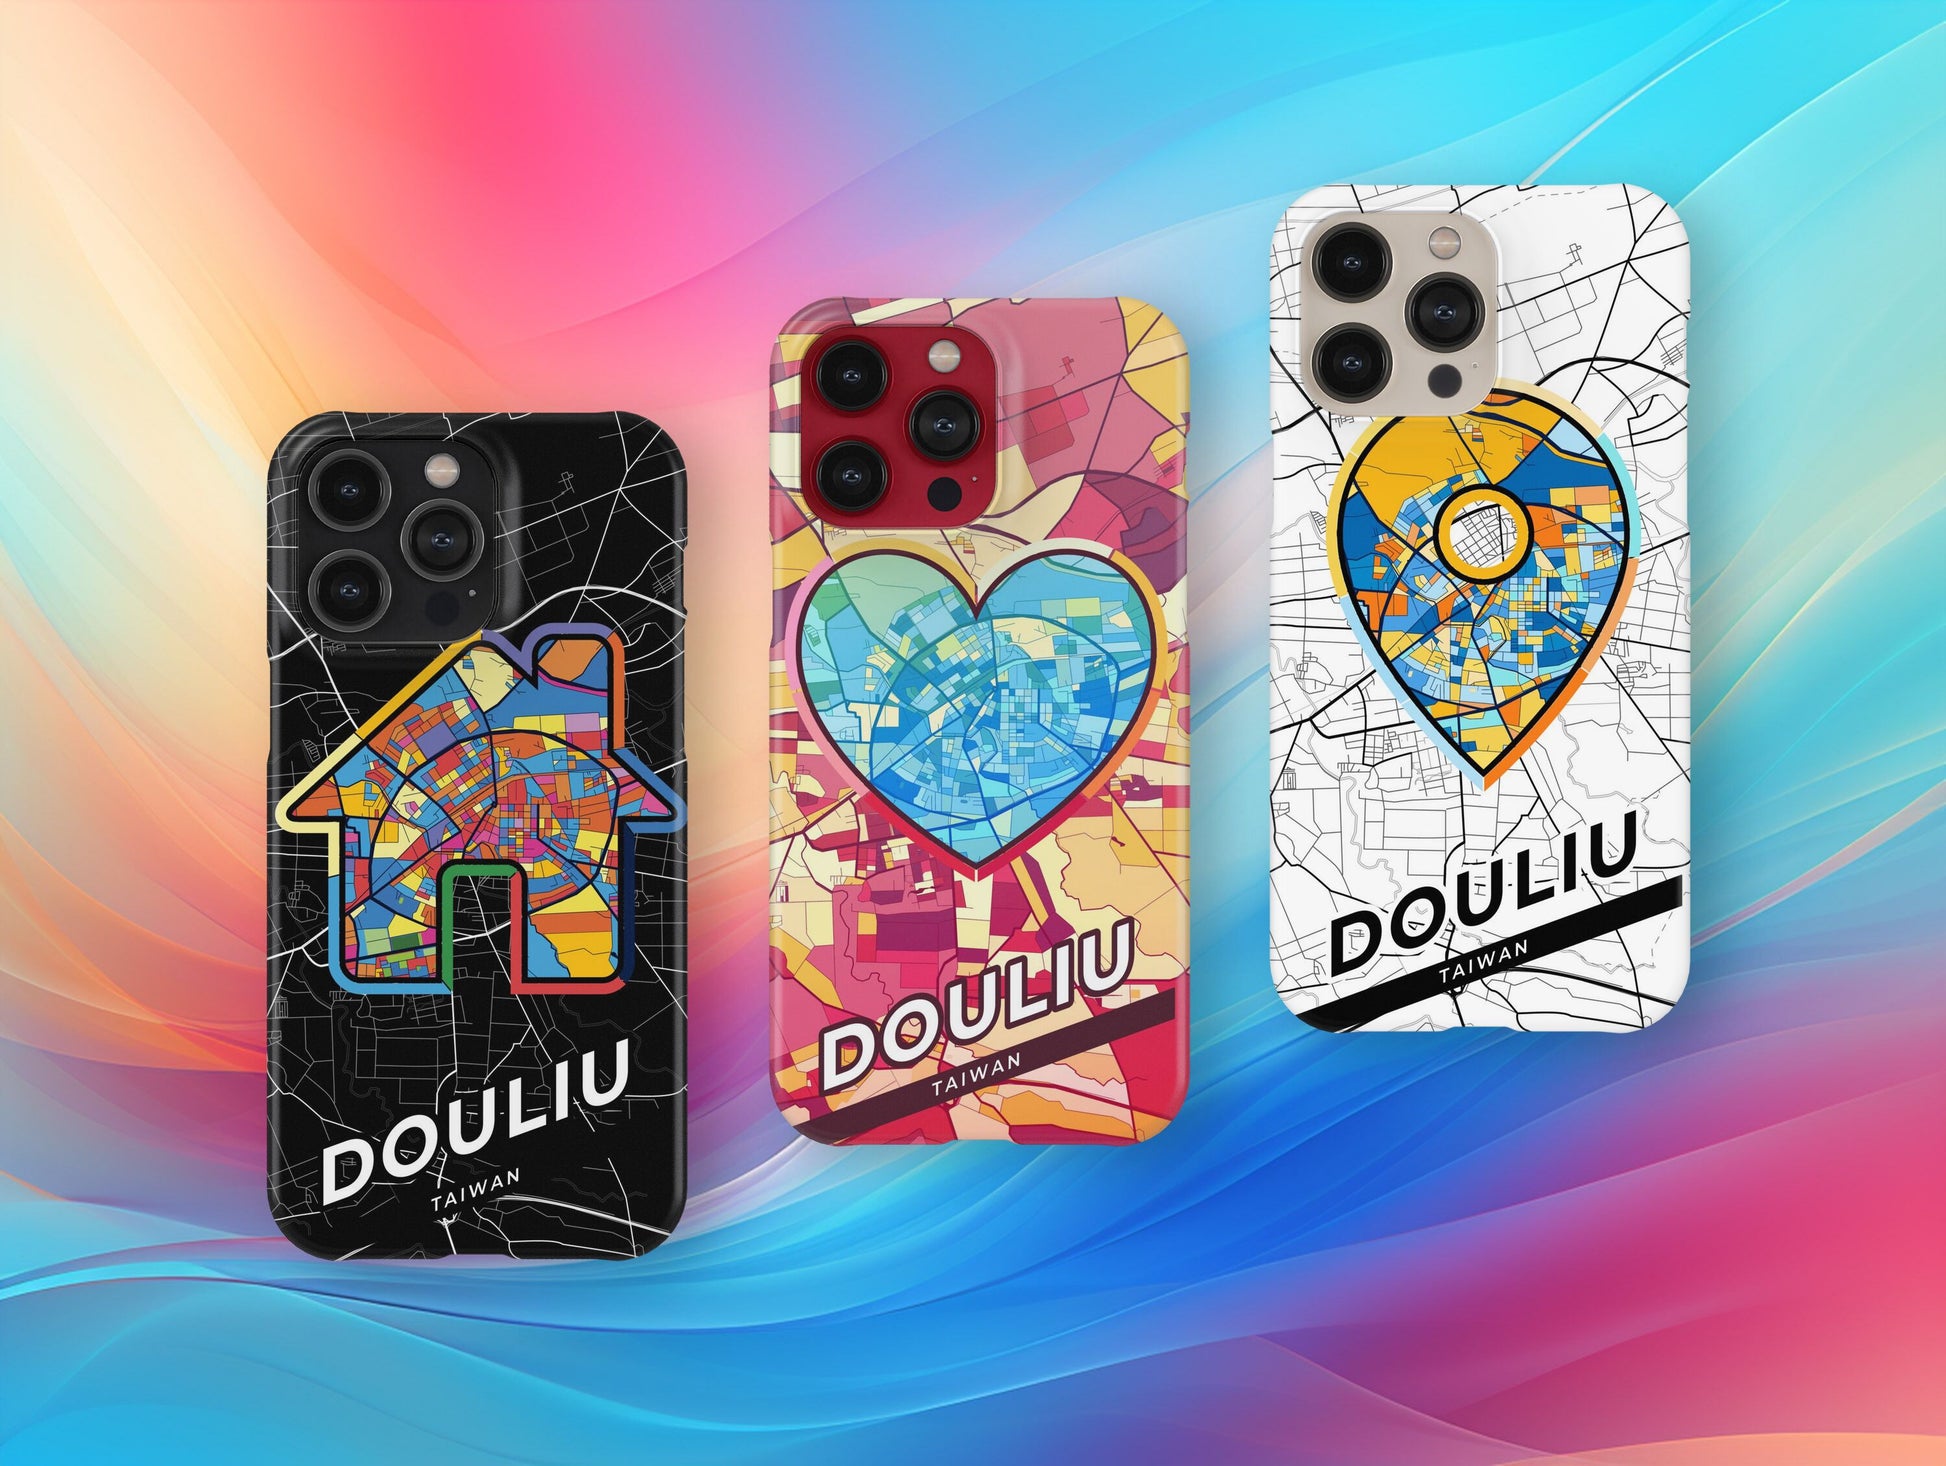 Douliu Taiwan slim phone case with colorful icon. Birthday, wedding or housewarming gift. Couple match cases.